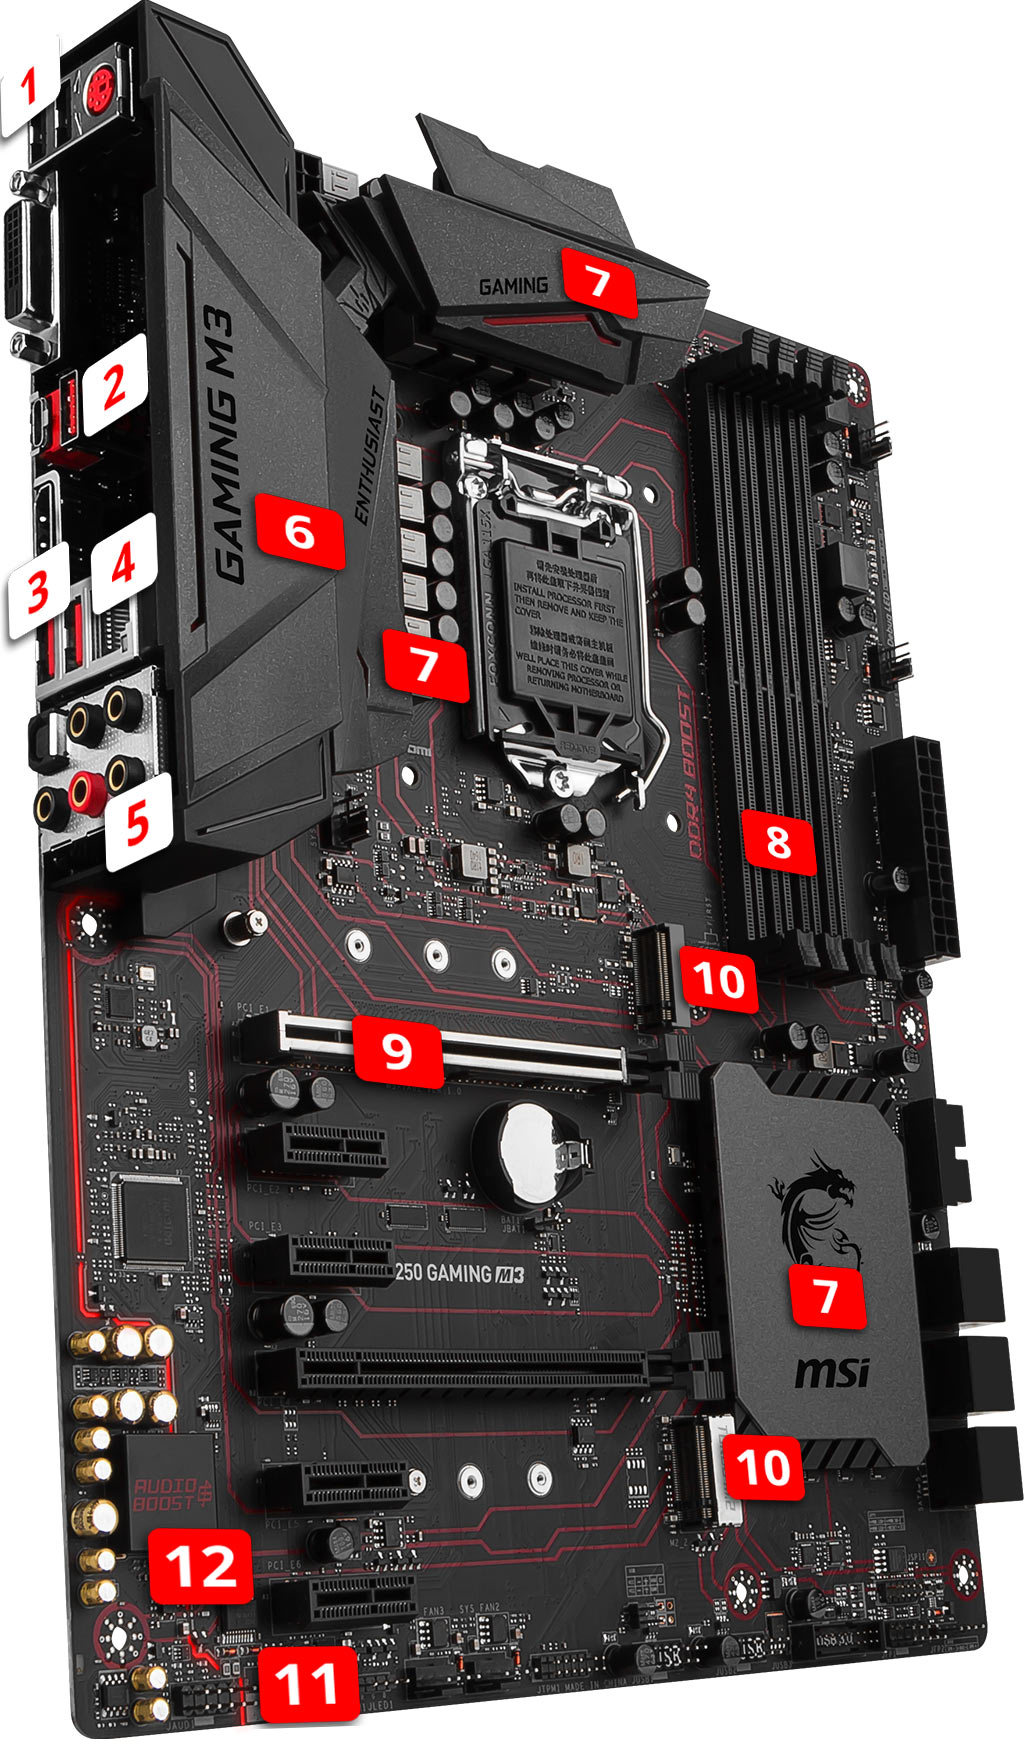 MSI B250 Gaming M3 Intel Motherboard - Free Shipping - South Africa